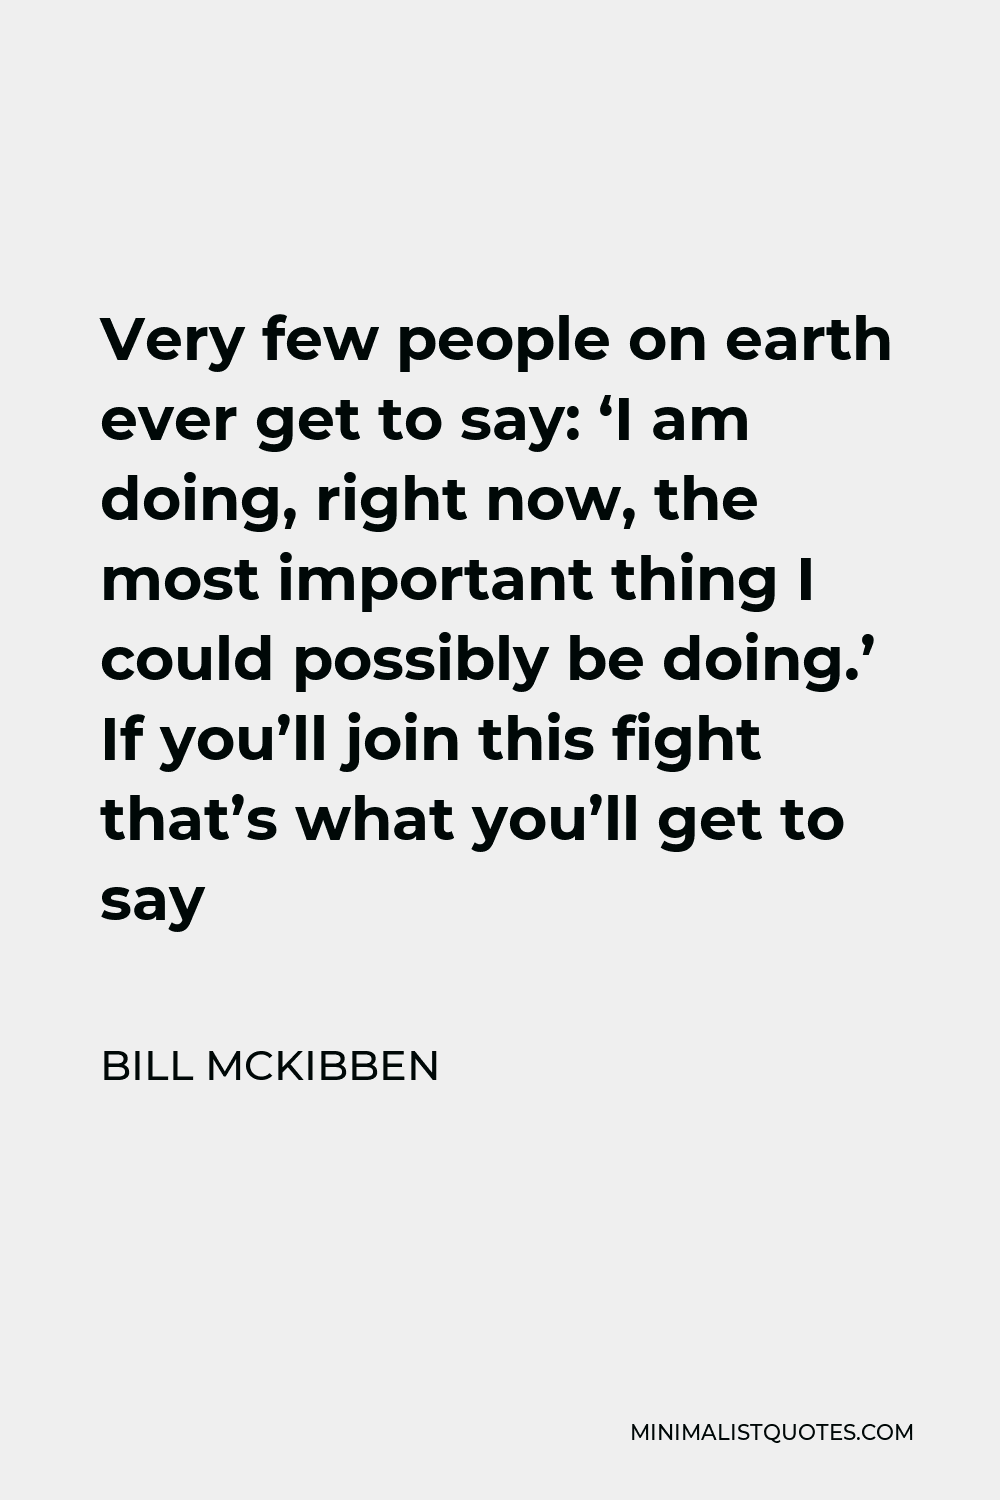 Bill McKibben Quote - Very few people on earth ever get to say: ‘I am doing, right now, the most important thing I could possibly be doing.’ If you’ll join this fight that’s what you’ll get to say